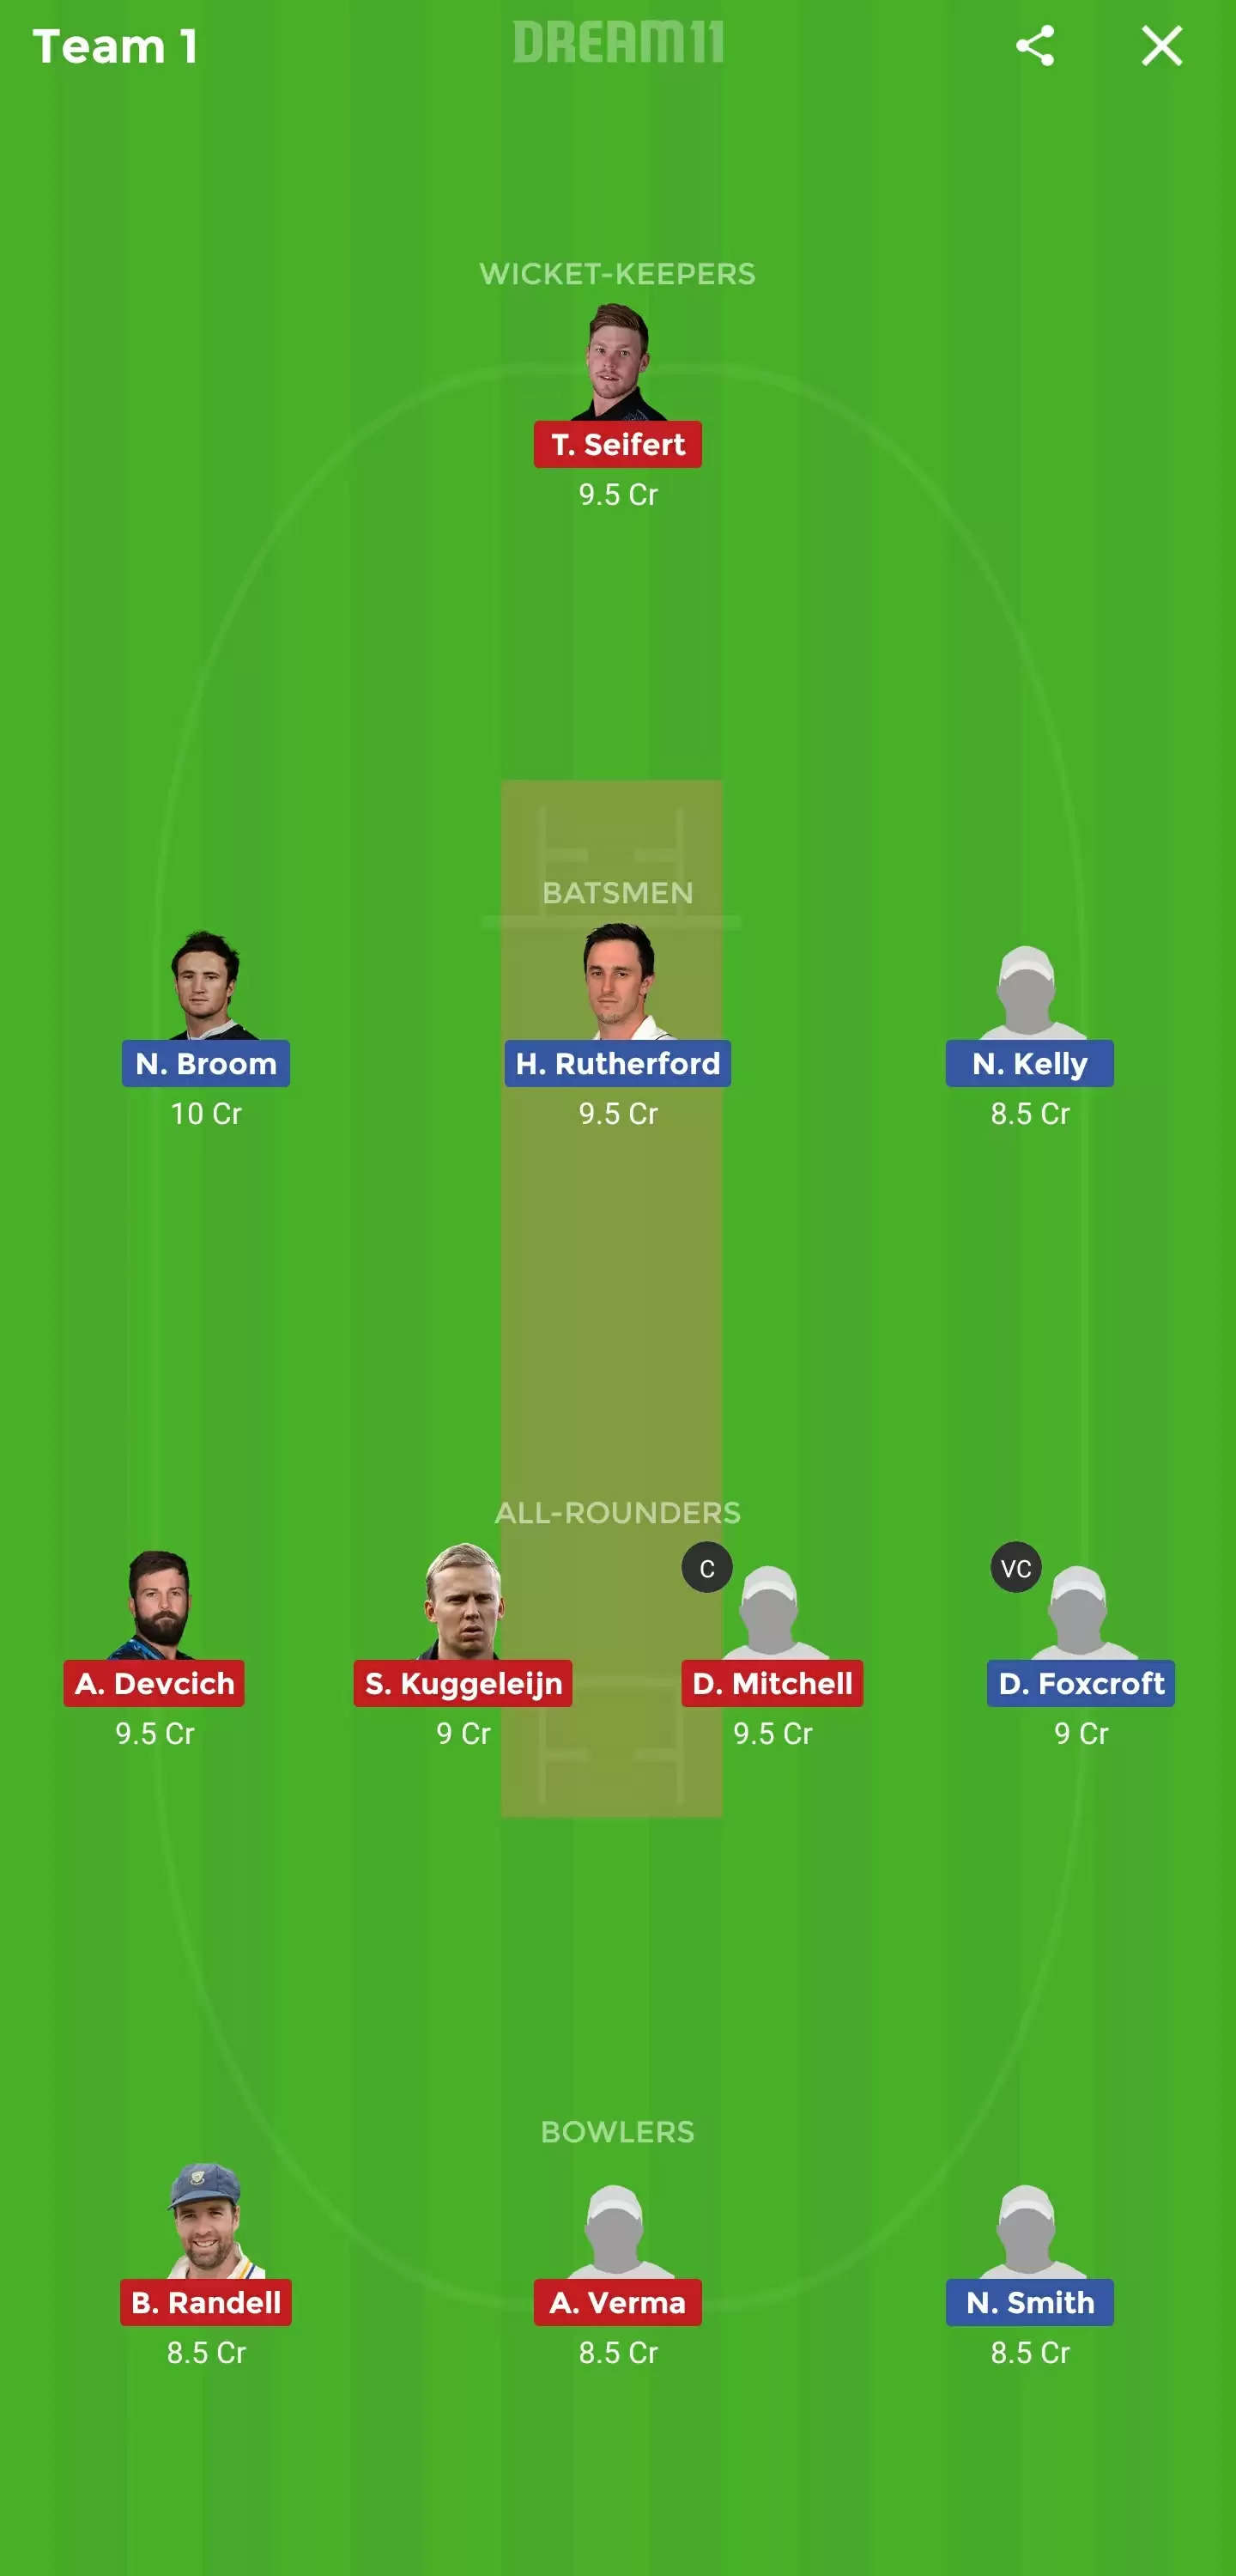 Super Smash League: OTG vs NK Dream11 Prediction, Fantasy Cricket Tips, Playing XI, Team, Pitch Report and Weather Conditions